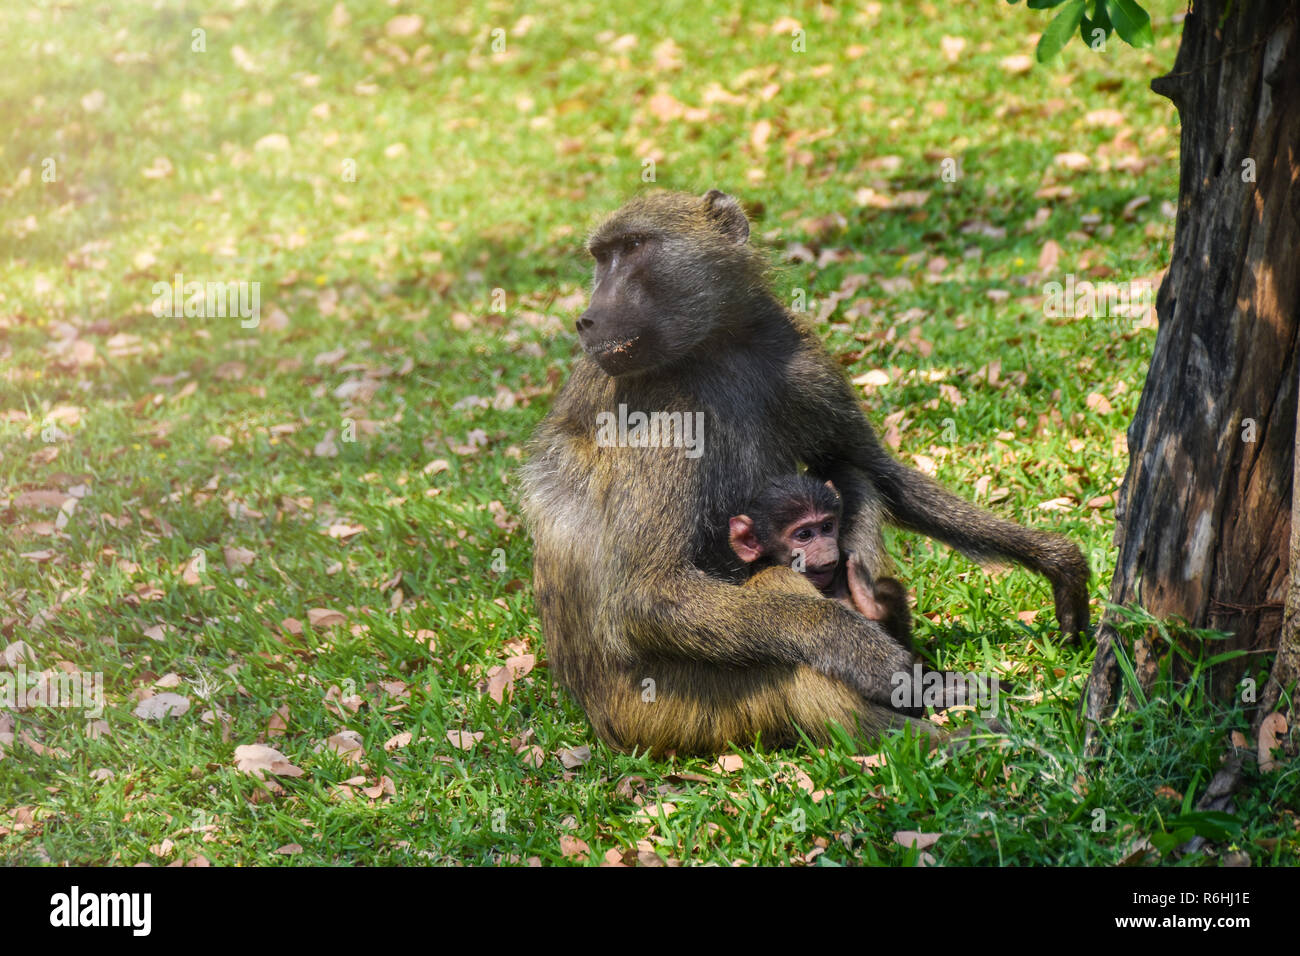 adult baboon and baby resting on ground Stock Photo